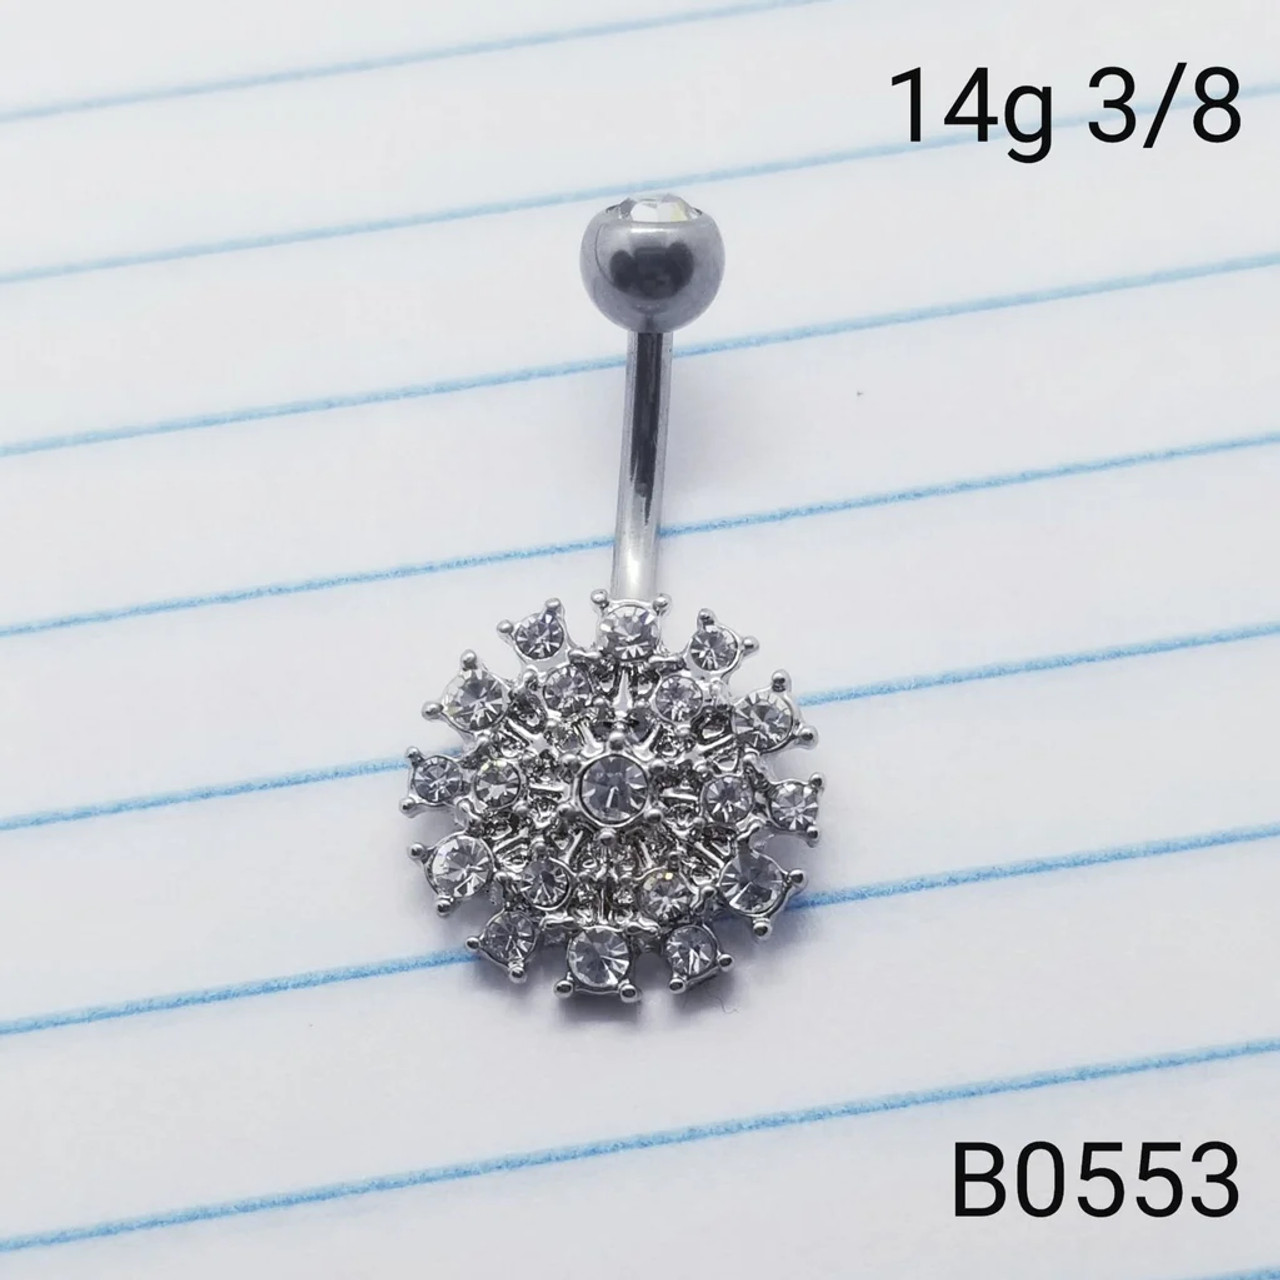 Buy 2PCS Surgical Stainless Steel Internally Threaded Belly Button Rings  14g 9/16 14mmNon Dangle Navel Bars Piercing Jewelry 2355 Online at Low  Prices in India | Amazon Jewellery Store - Amazon.in